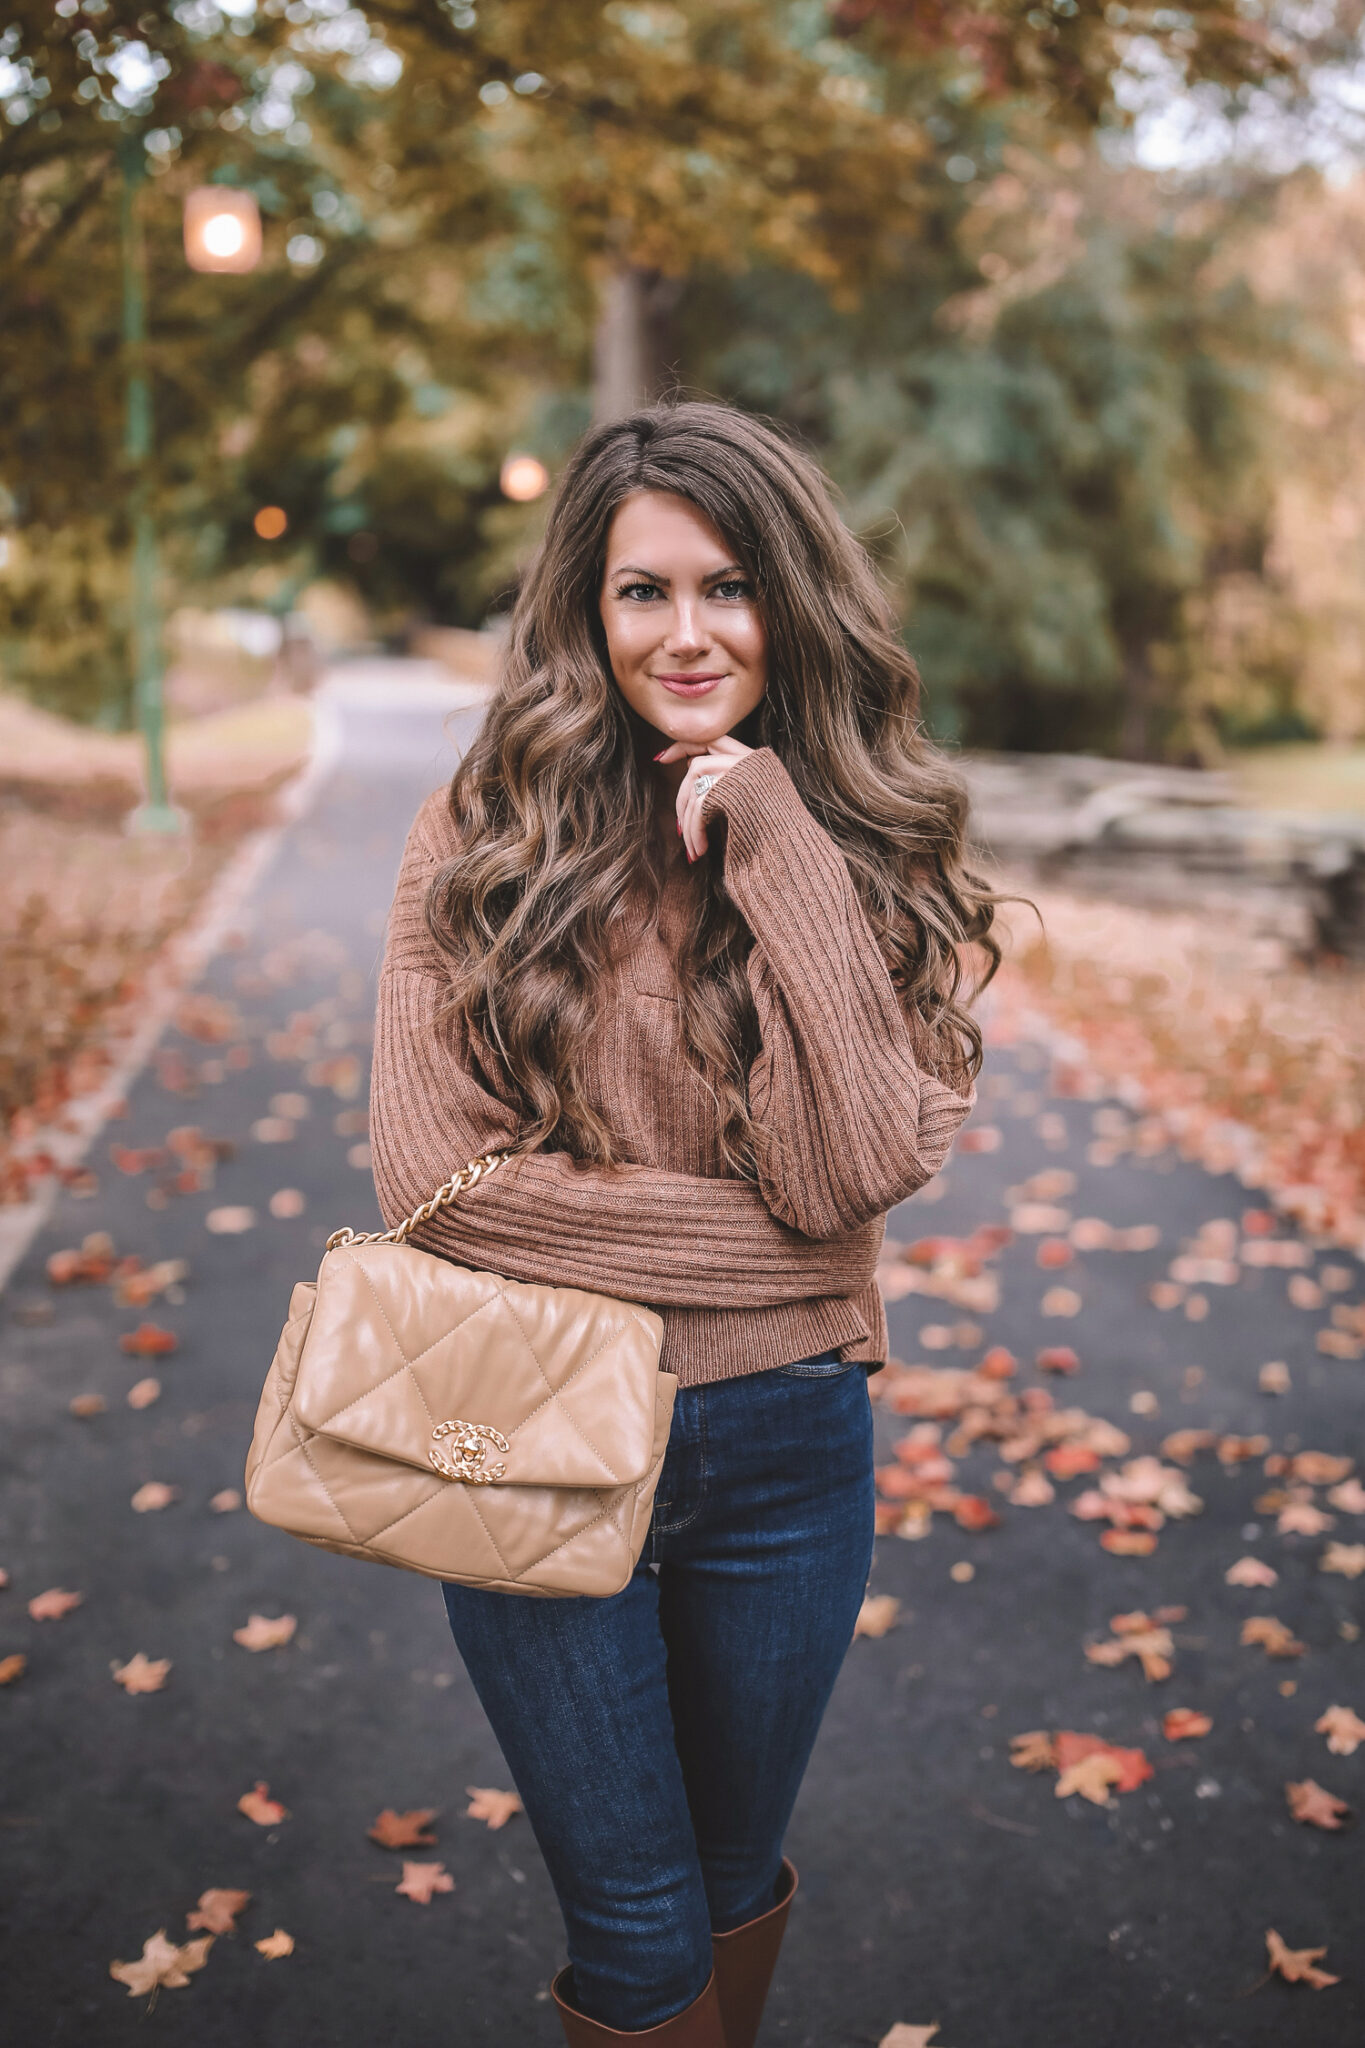 Sweater Weather - Southern Curls & Pearls